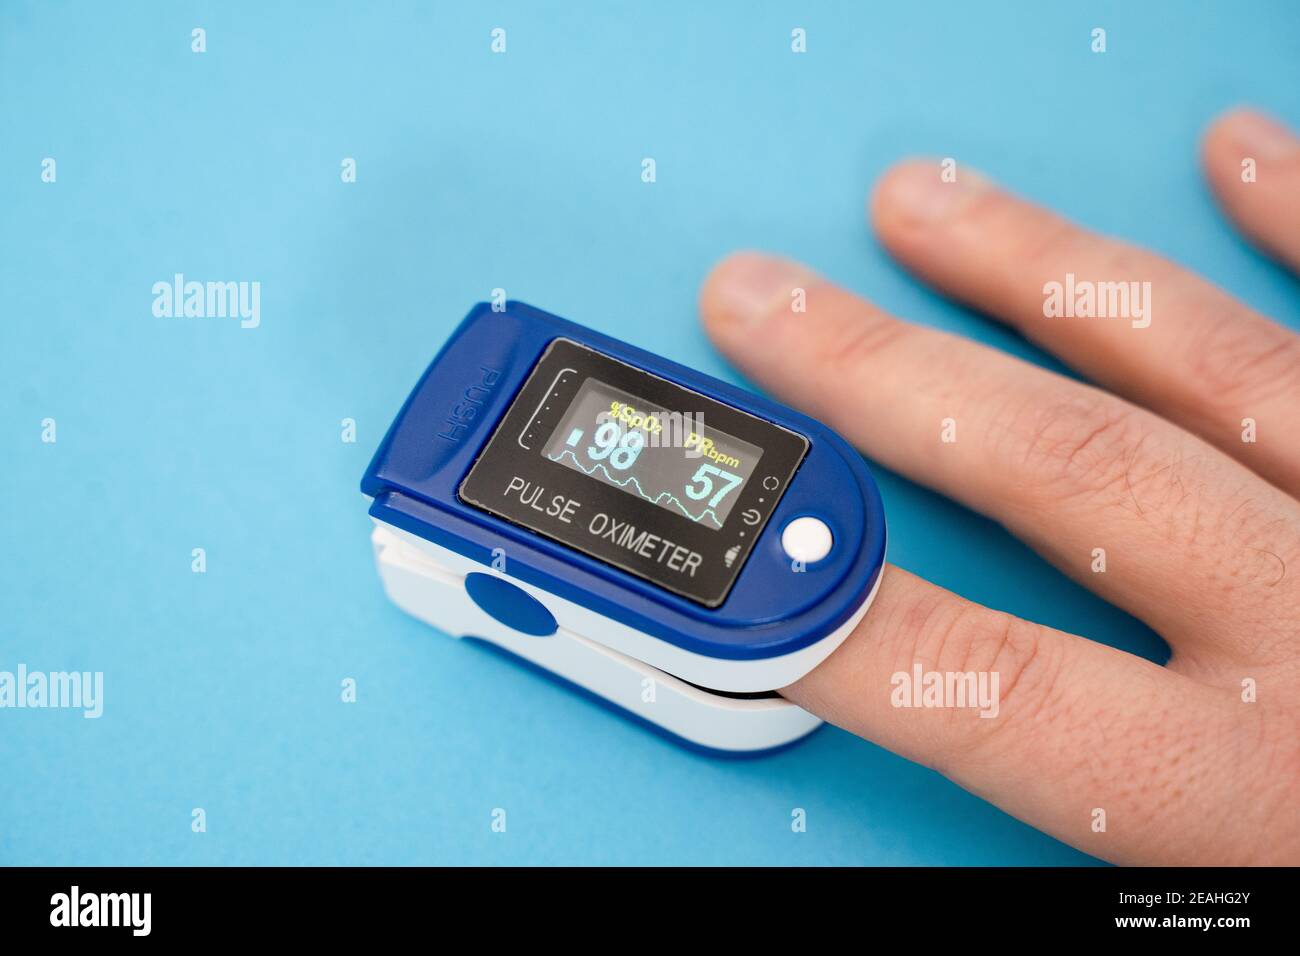 Pulse oximeter, finger digital device to measure oxygen saturation in blood on blue background Stock Photo